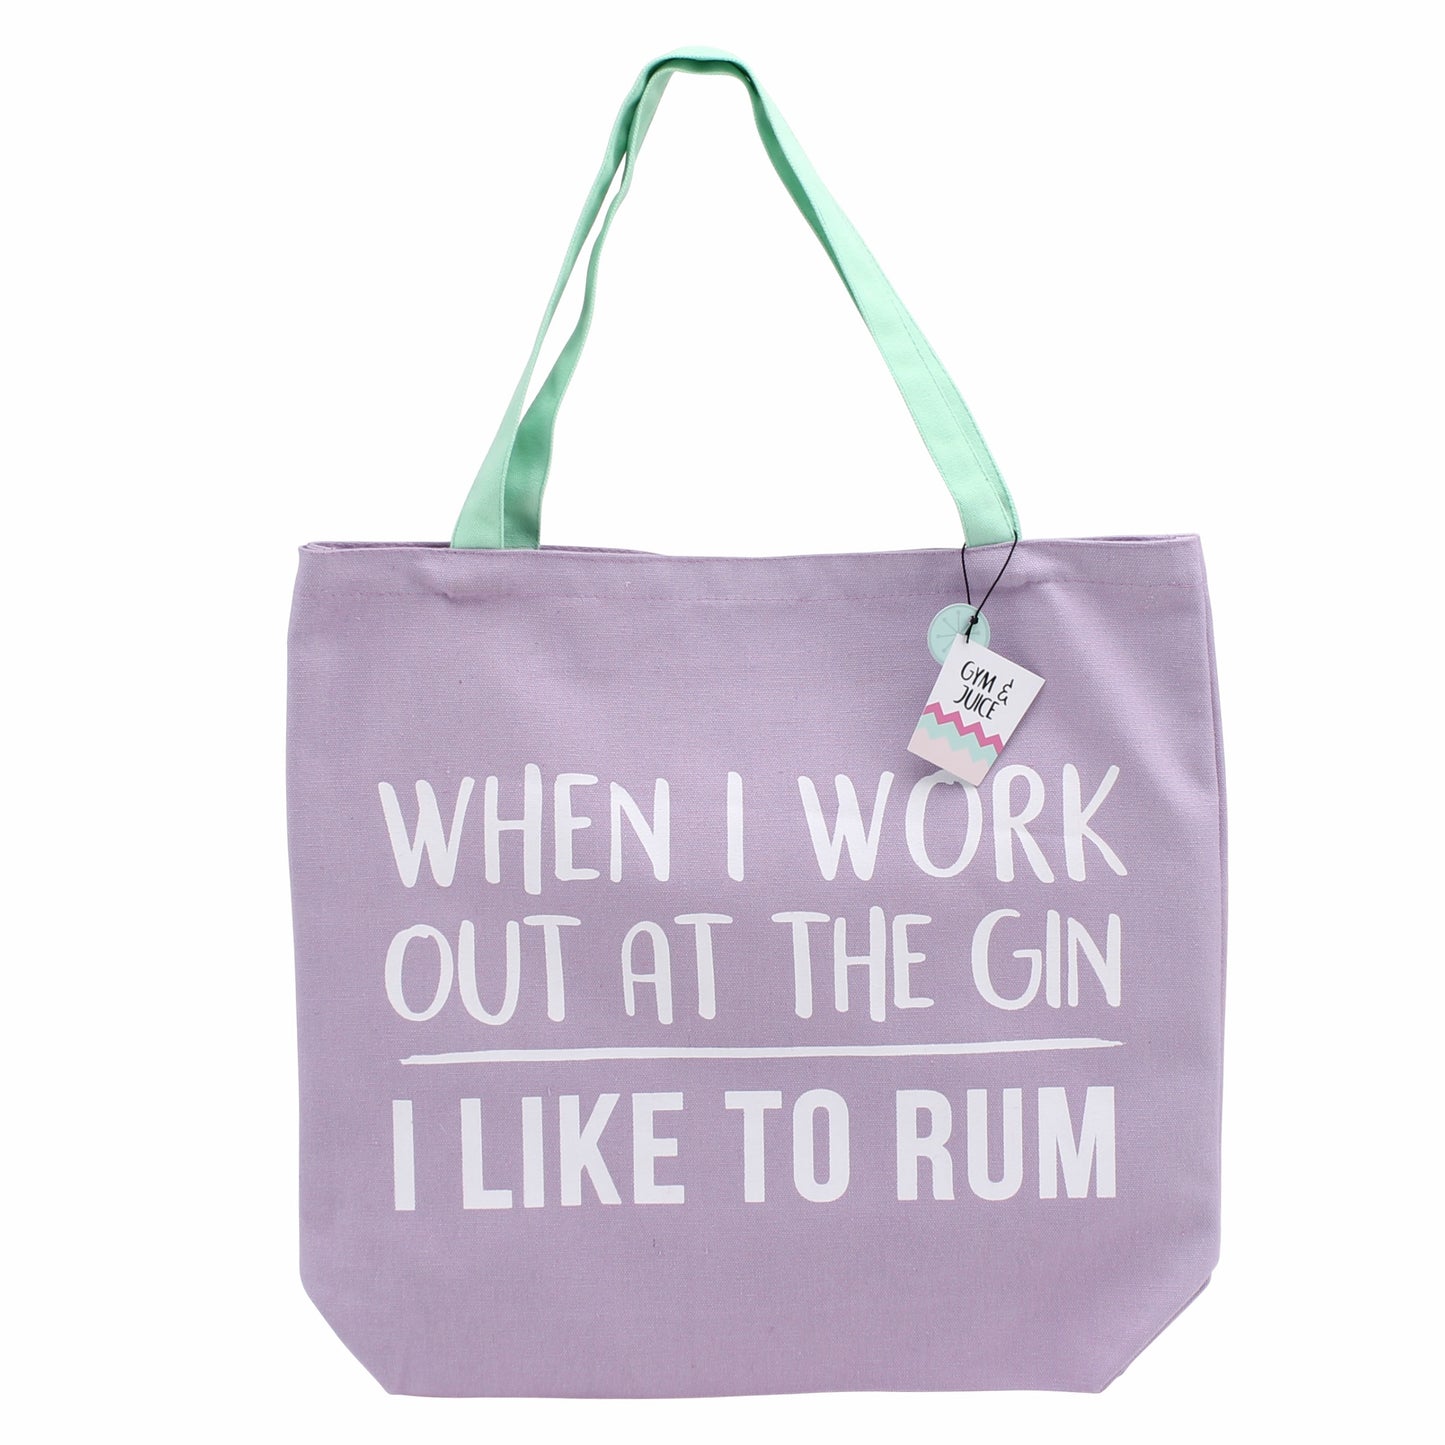 Purple canvas shopping bag featuring slogan When I go to the gin, I like to rum